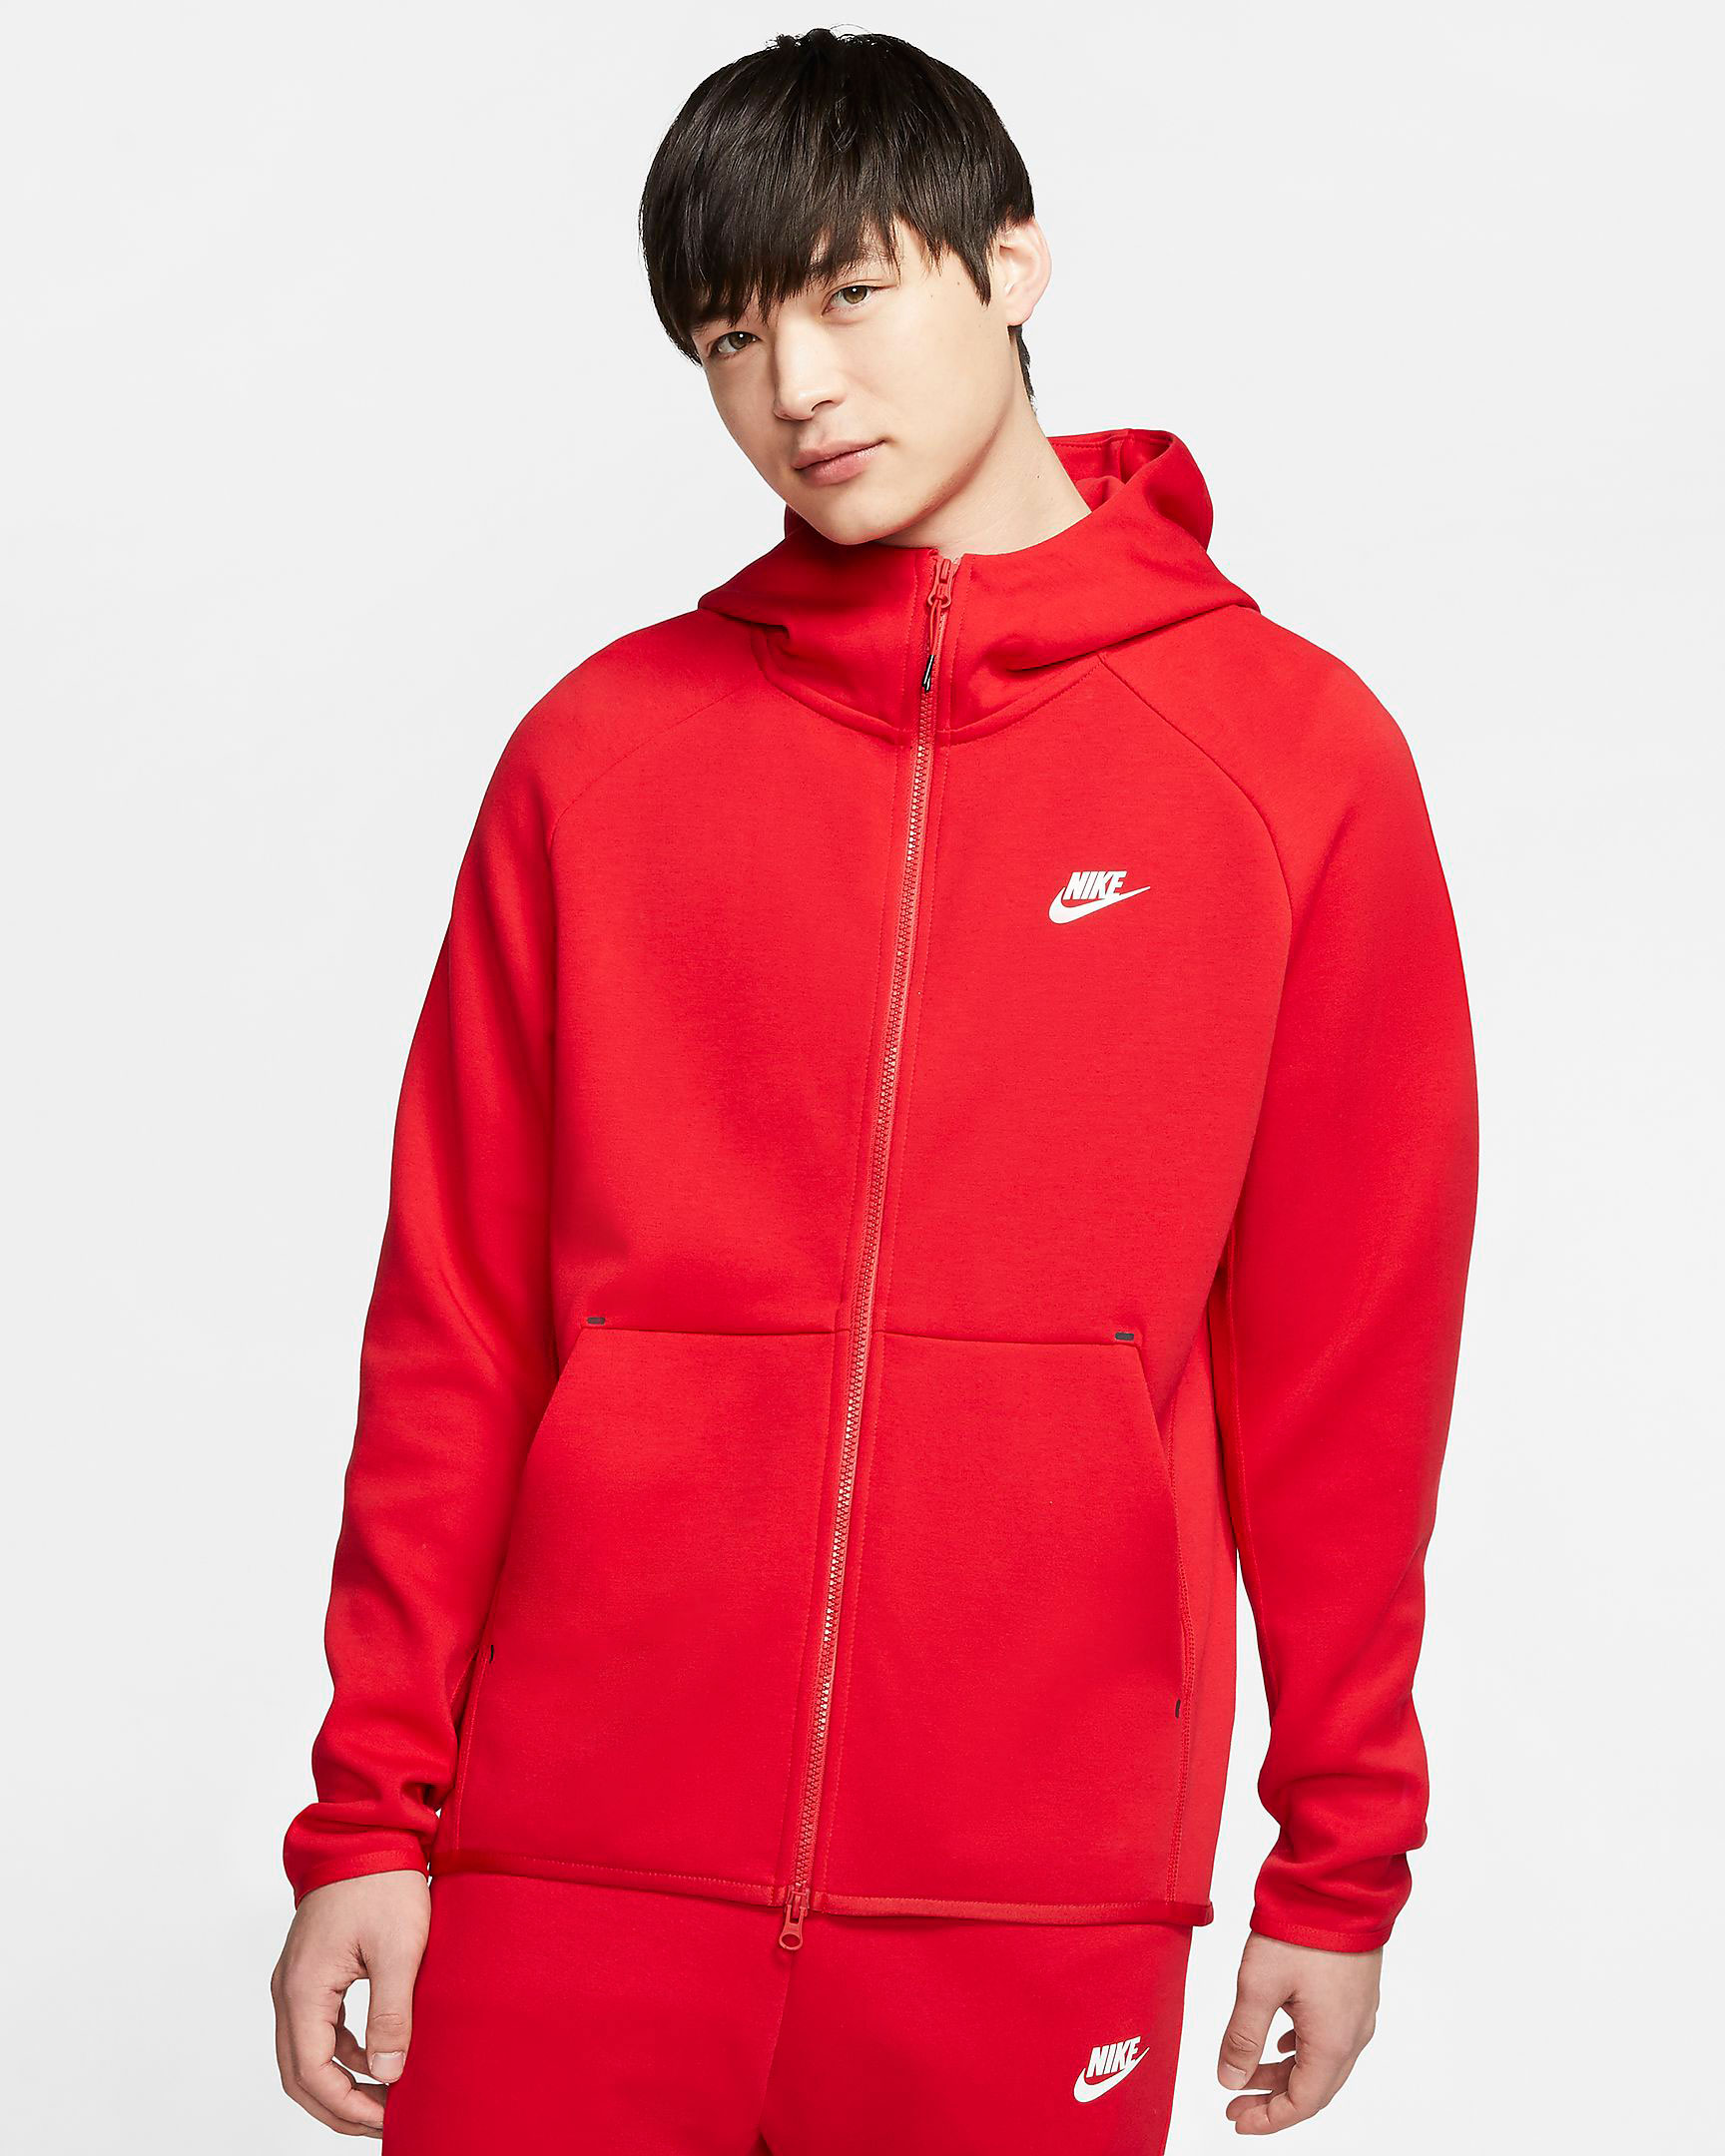 red nike hoodie outfit